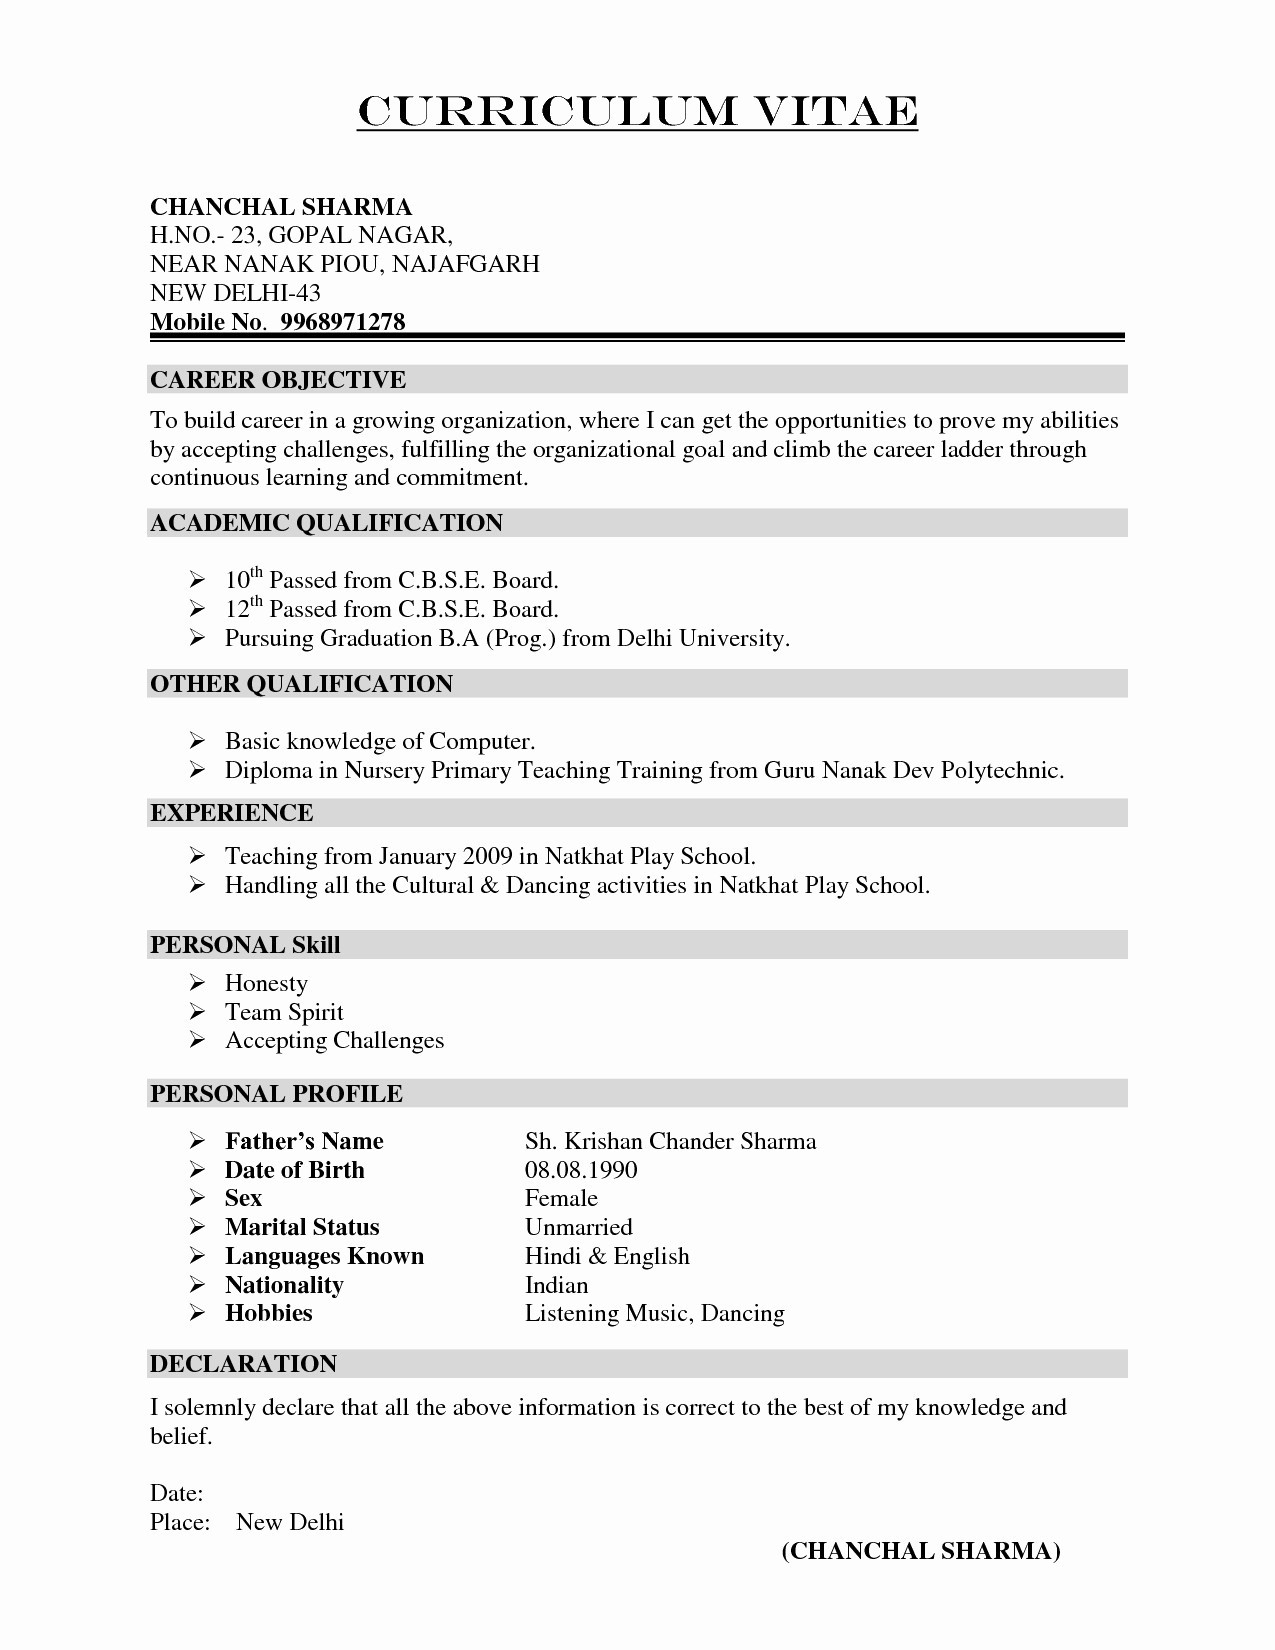 Email Letter Template - Resumes and Cover Letters Elegant New Resume Cover Letter formatted